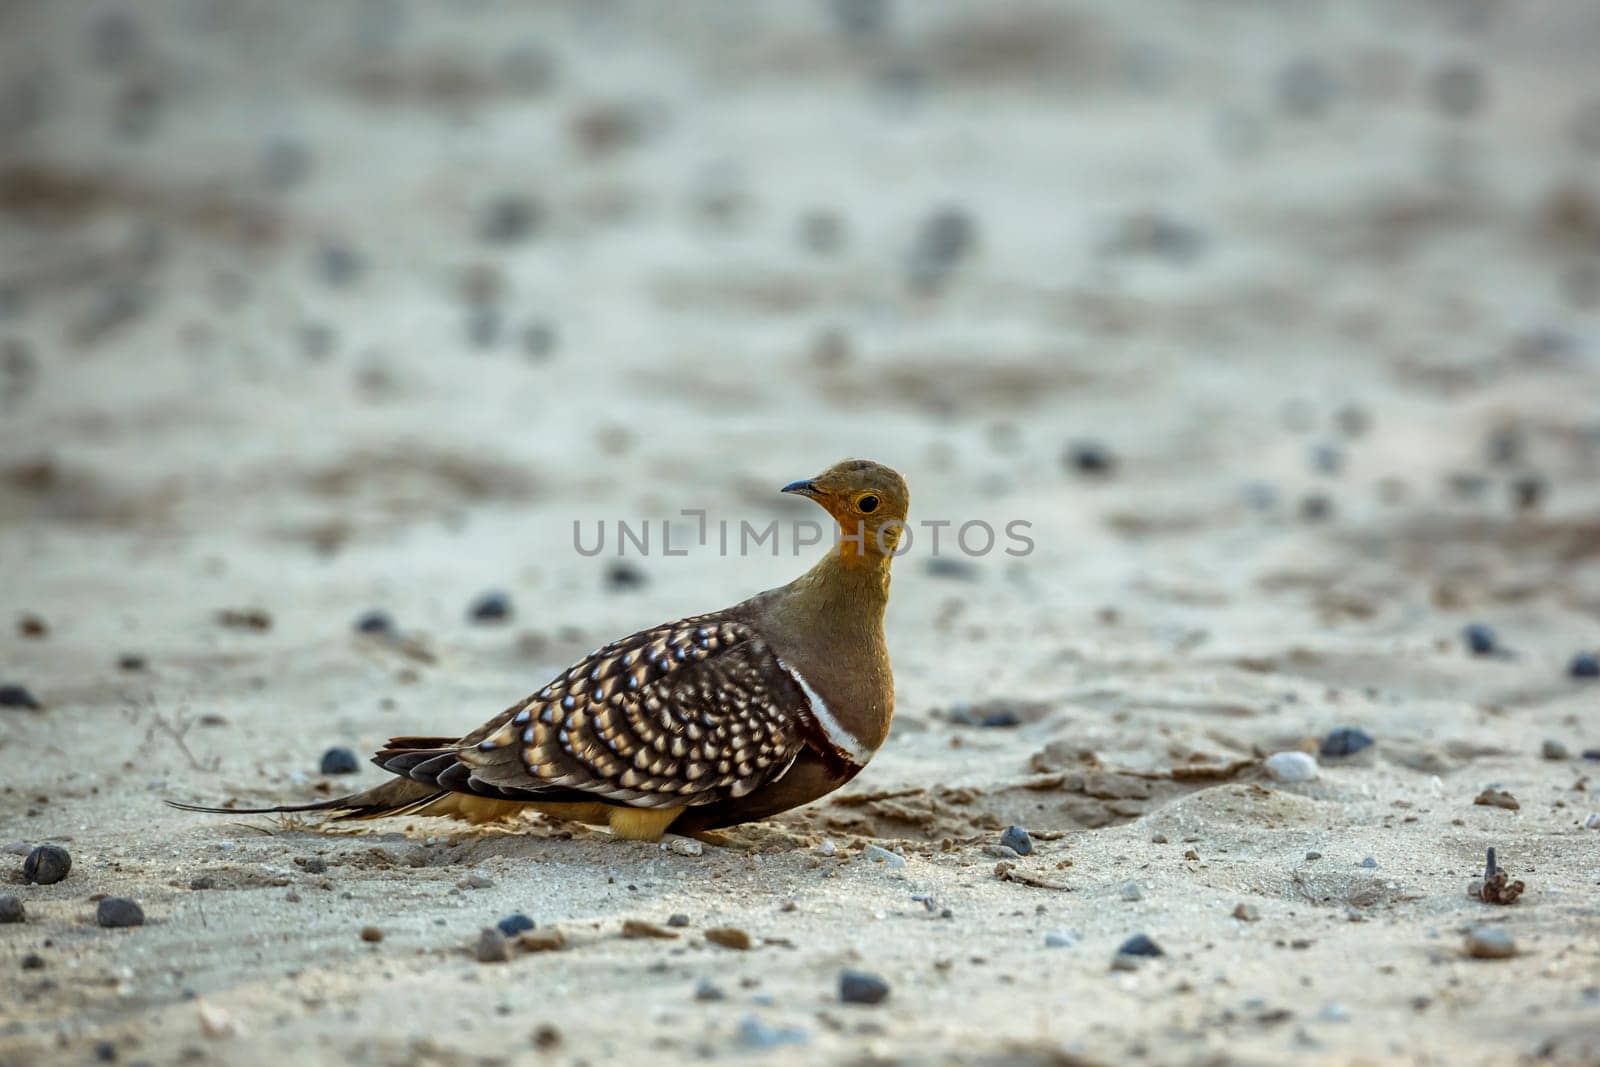 Namaqua sandgrouse in Kgalagadi transfrontier park, South Africa by PACOCOMO